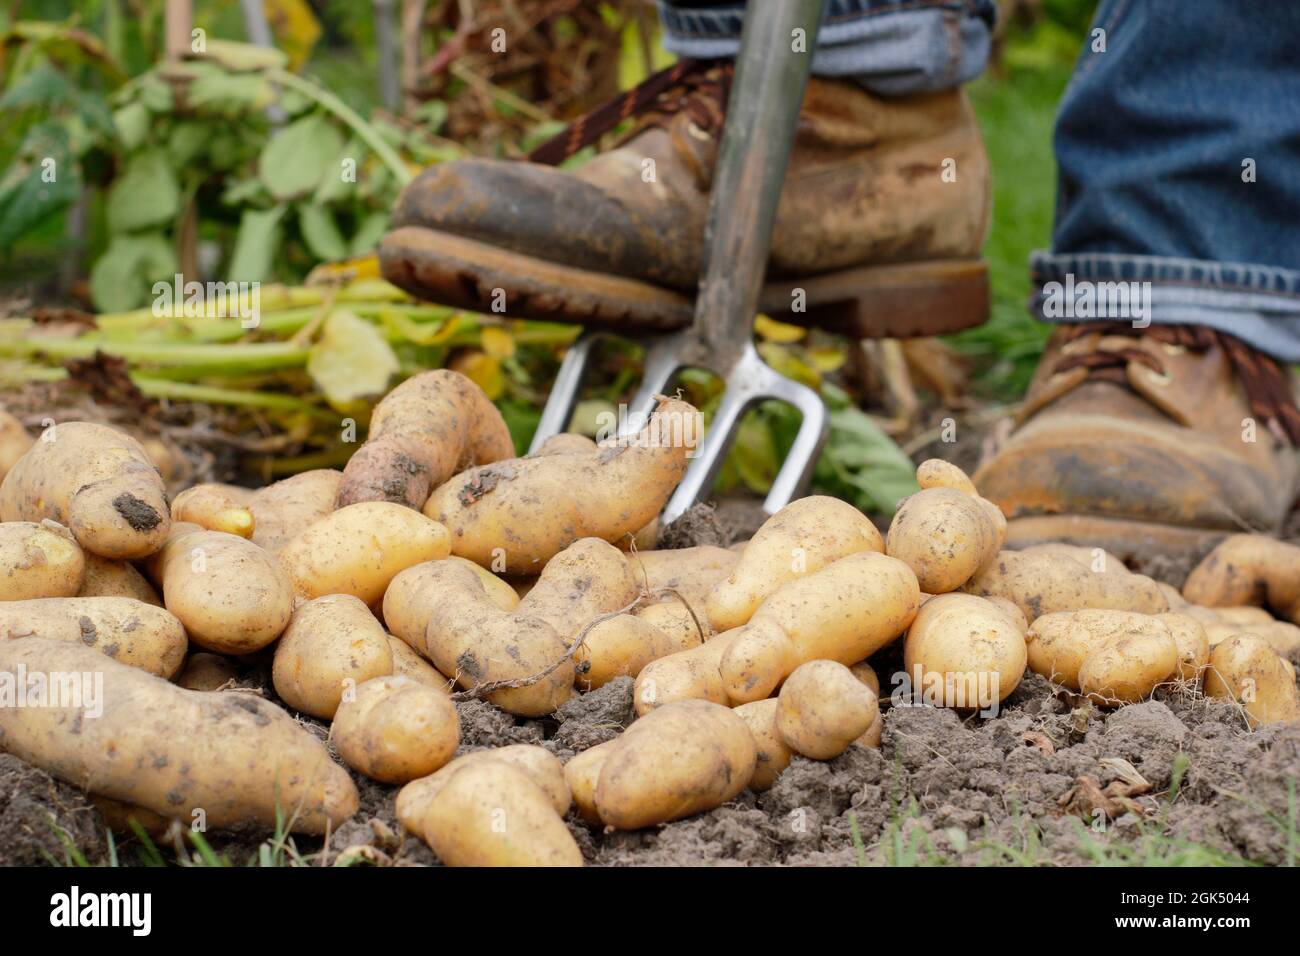 Digging up potatoes. Man digging up 'Ratte' maincrop potatoes in a garden and allowing them to dry on the soil surface before storing. UK Stock Photo